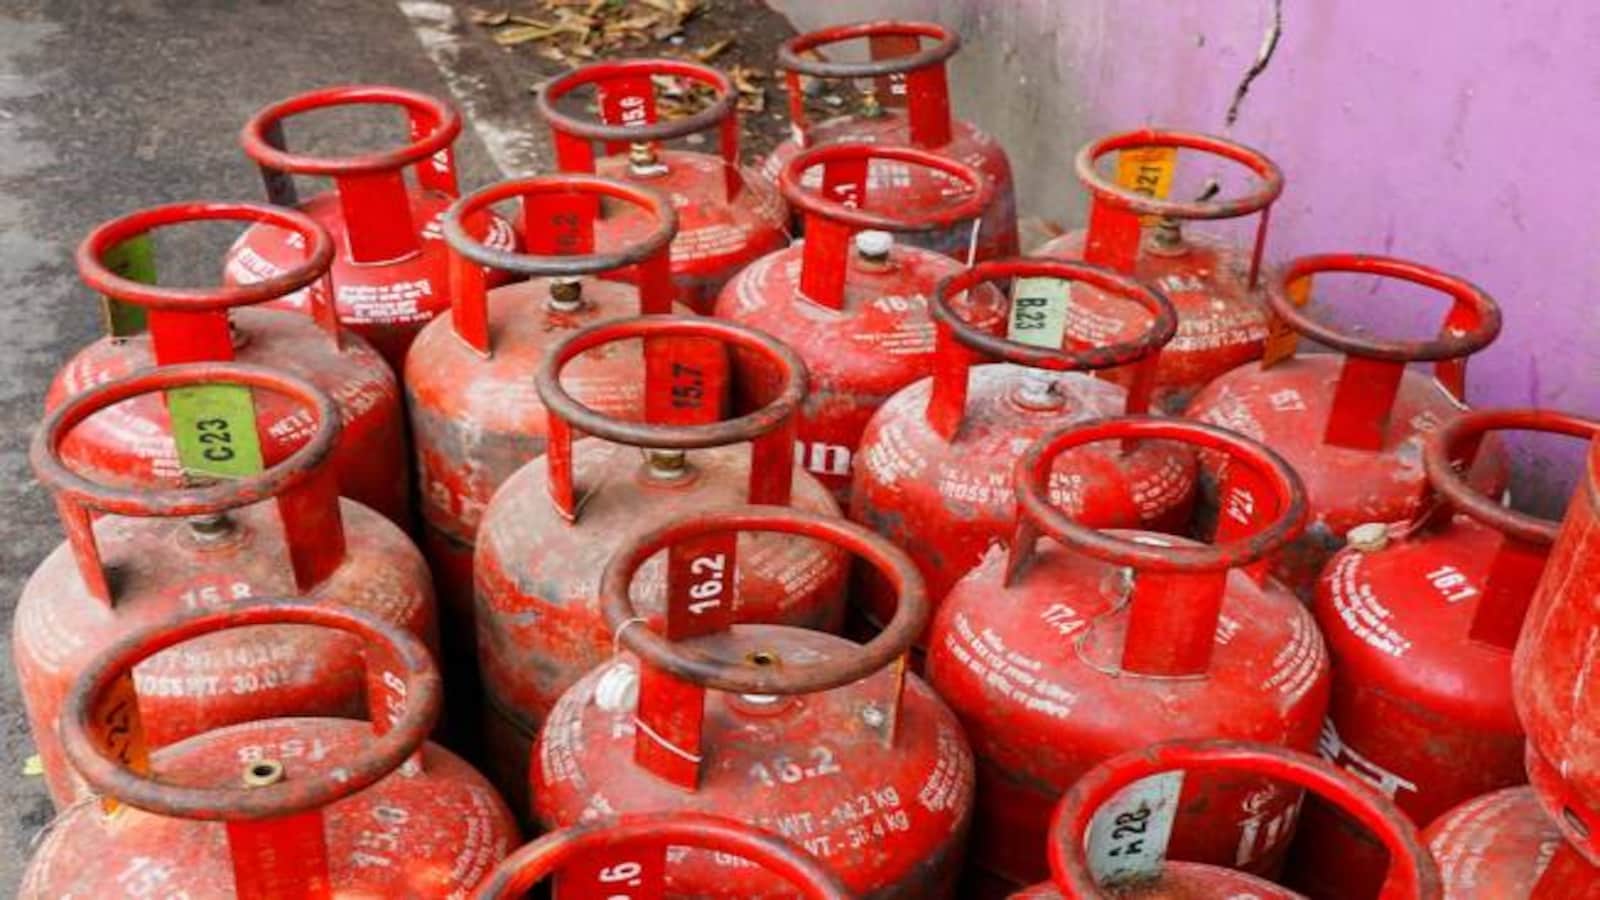 https://images.moneycontrol.com/static-mcnews/2022/11/LPG-gas-cylinder-shutterstock-652x435.jpg?impolicy=website&width=1600&height=900